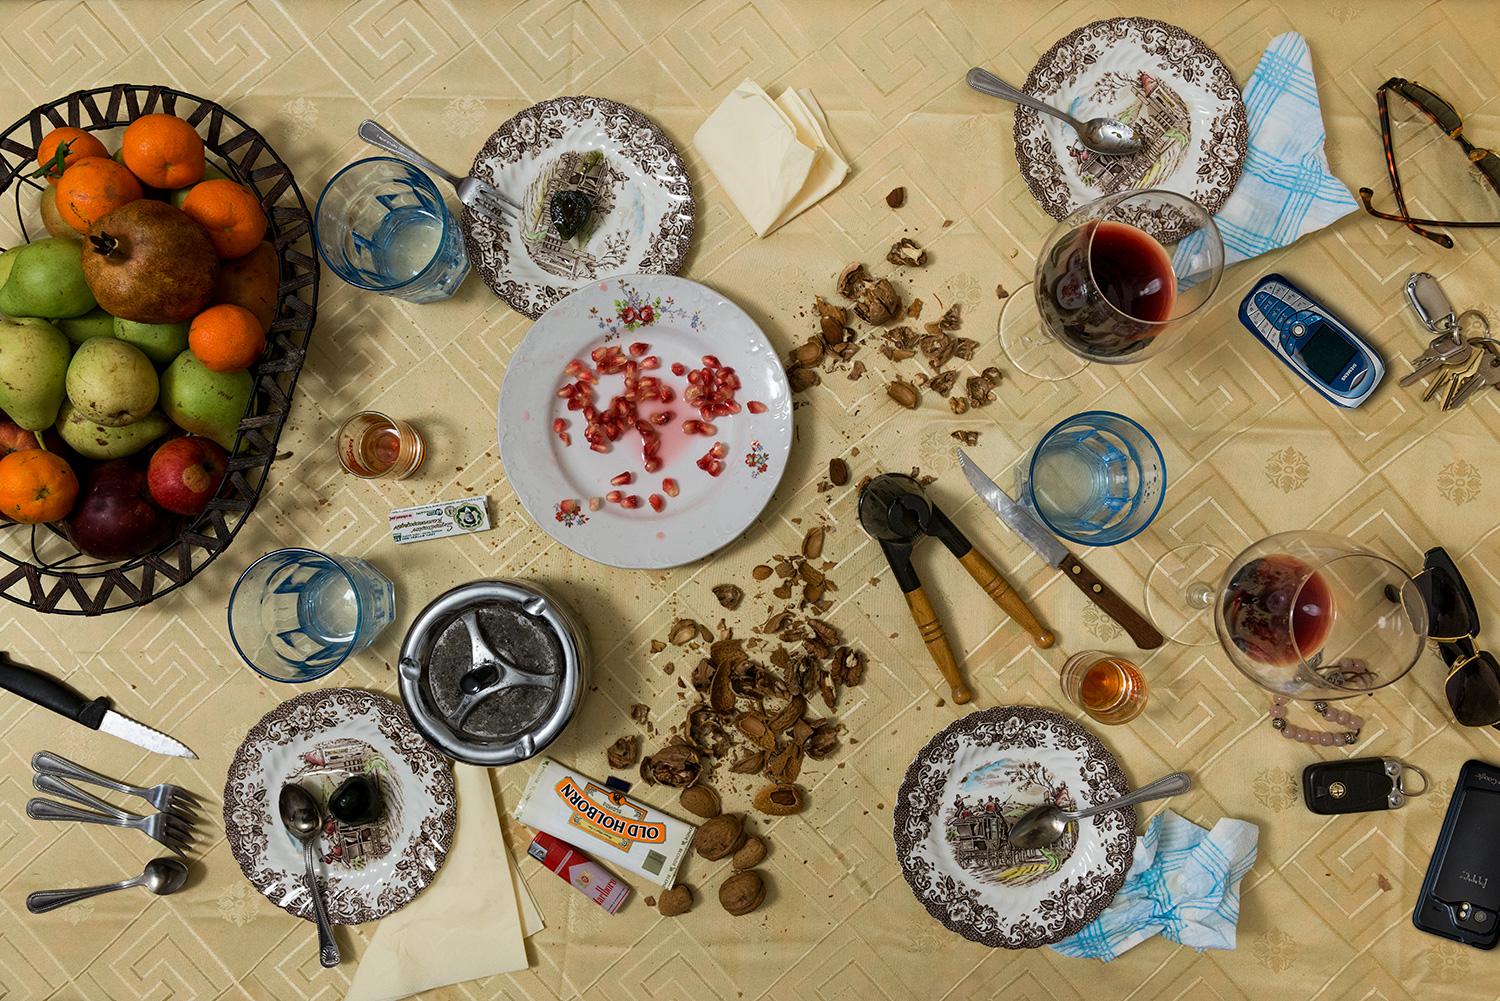 This photograph belongs to the series "Conversations." Evoking Dutch still-life as inspiration, these beautiful, contemporary tabletops contemplate technology's implications upon human interaction and memory. Shared meals with friends and family